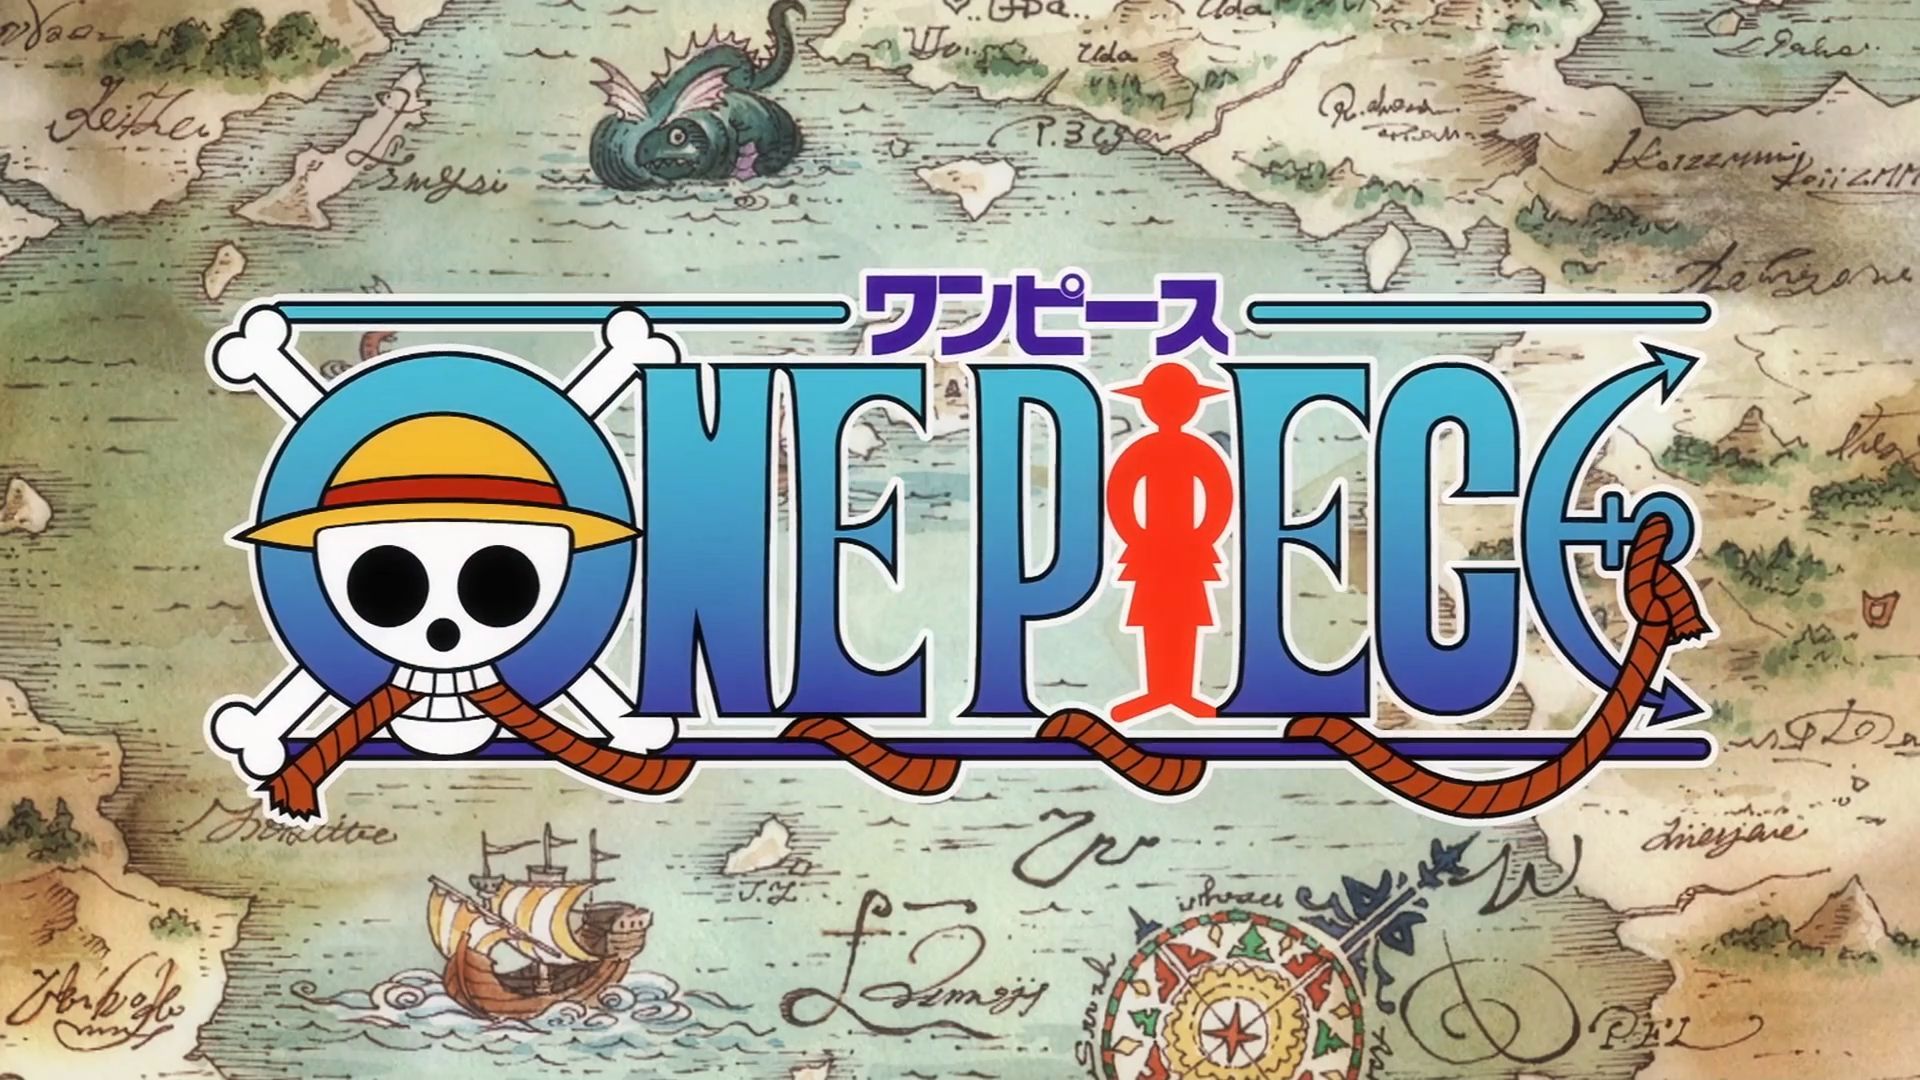 One Piece - Opening 23 【DREAMIN' ON】 4K 60FPS Creditless